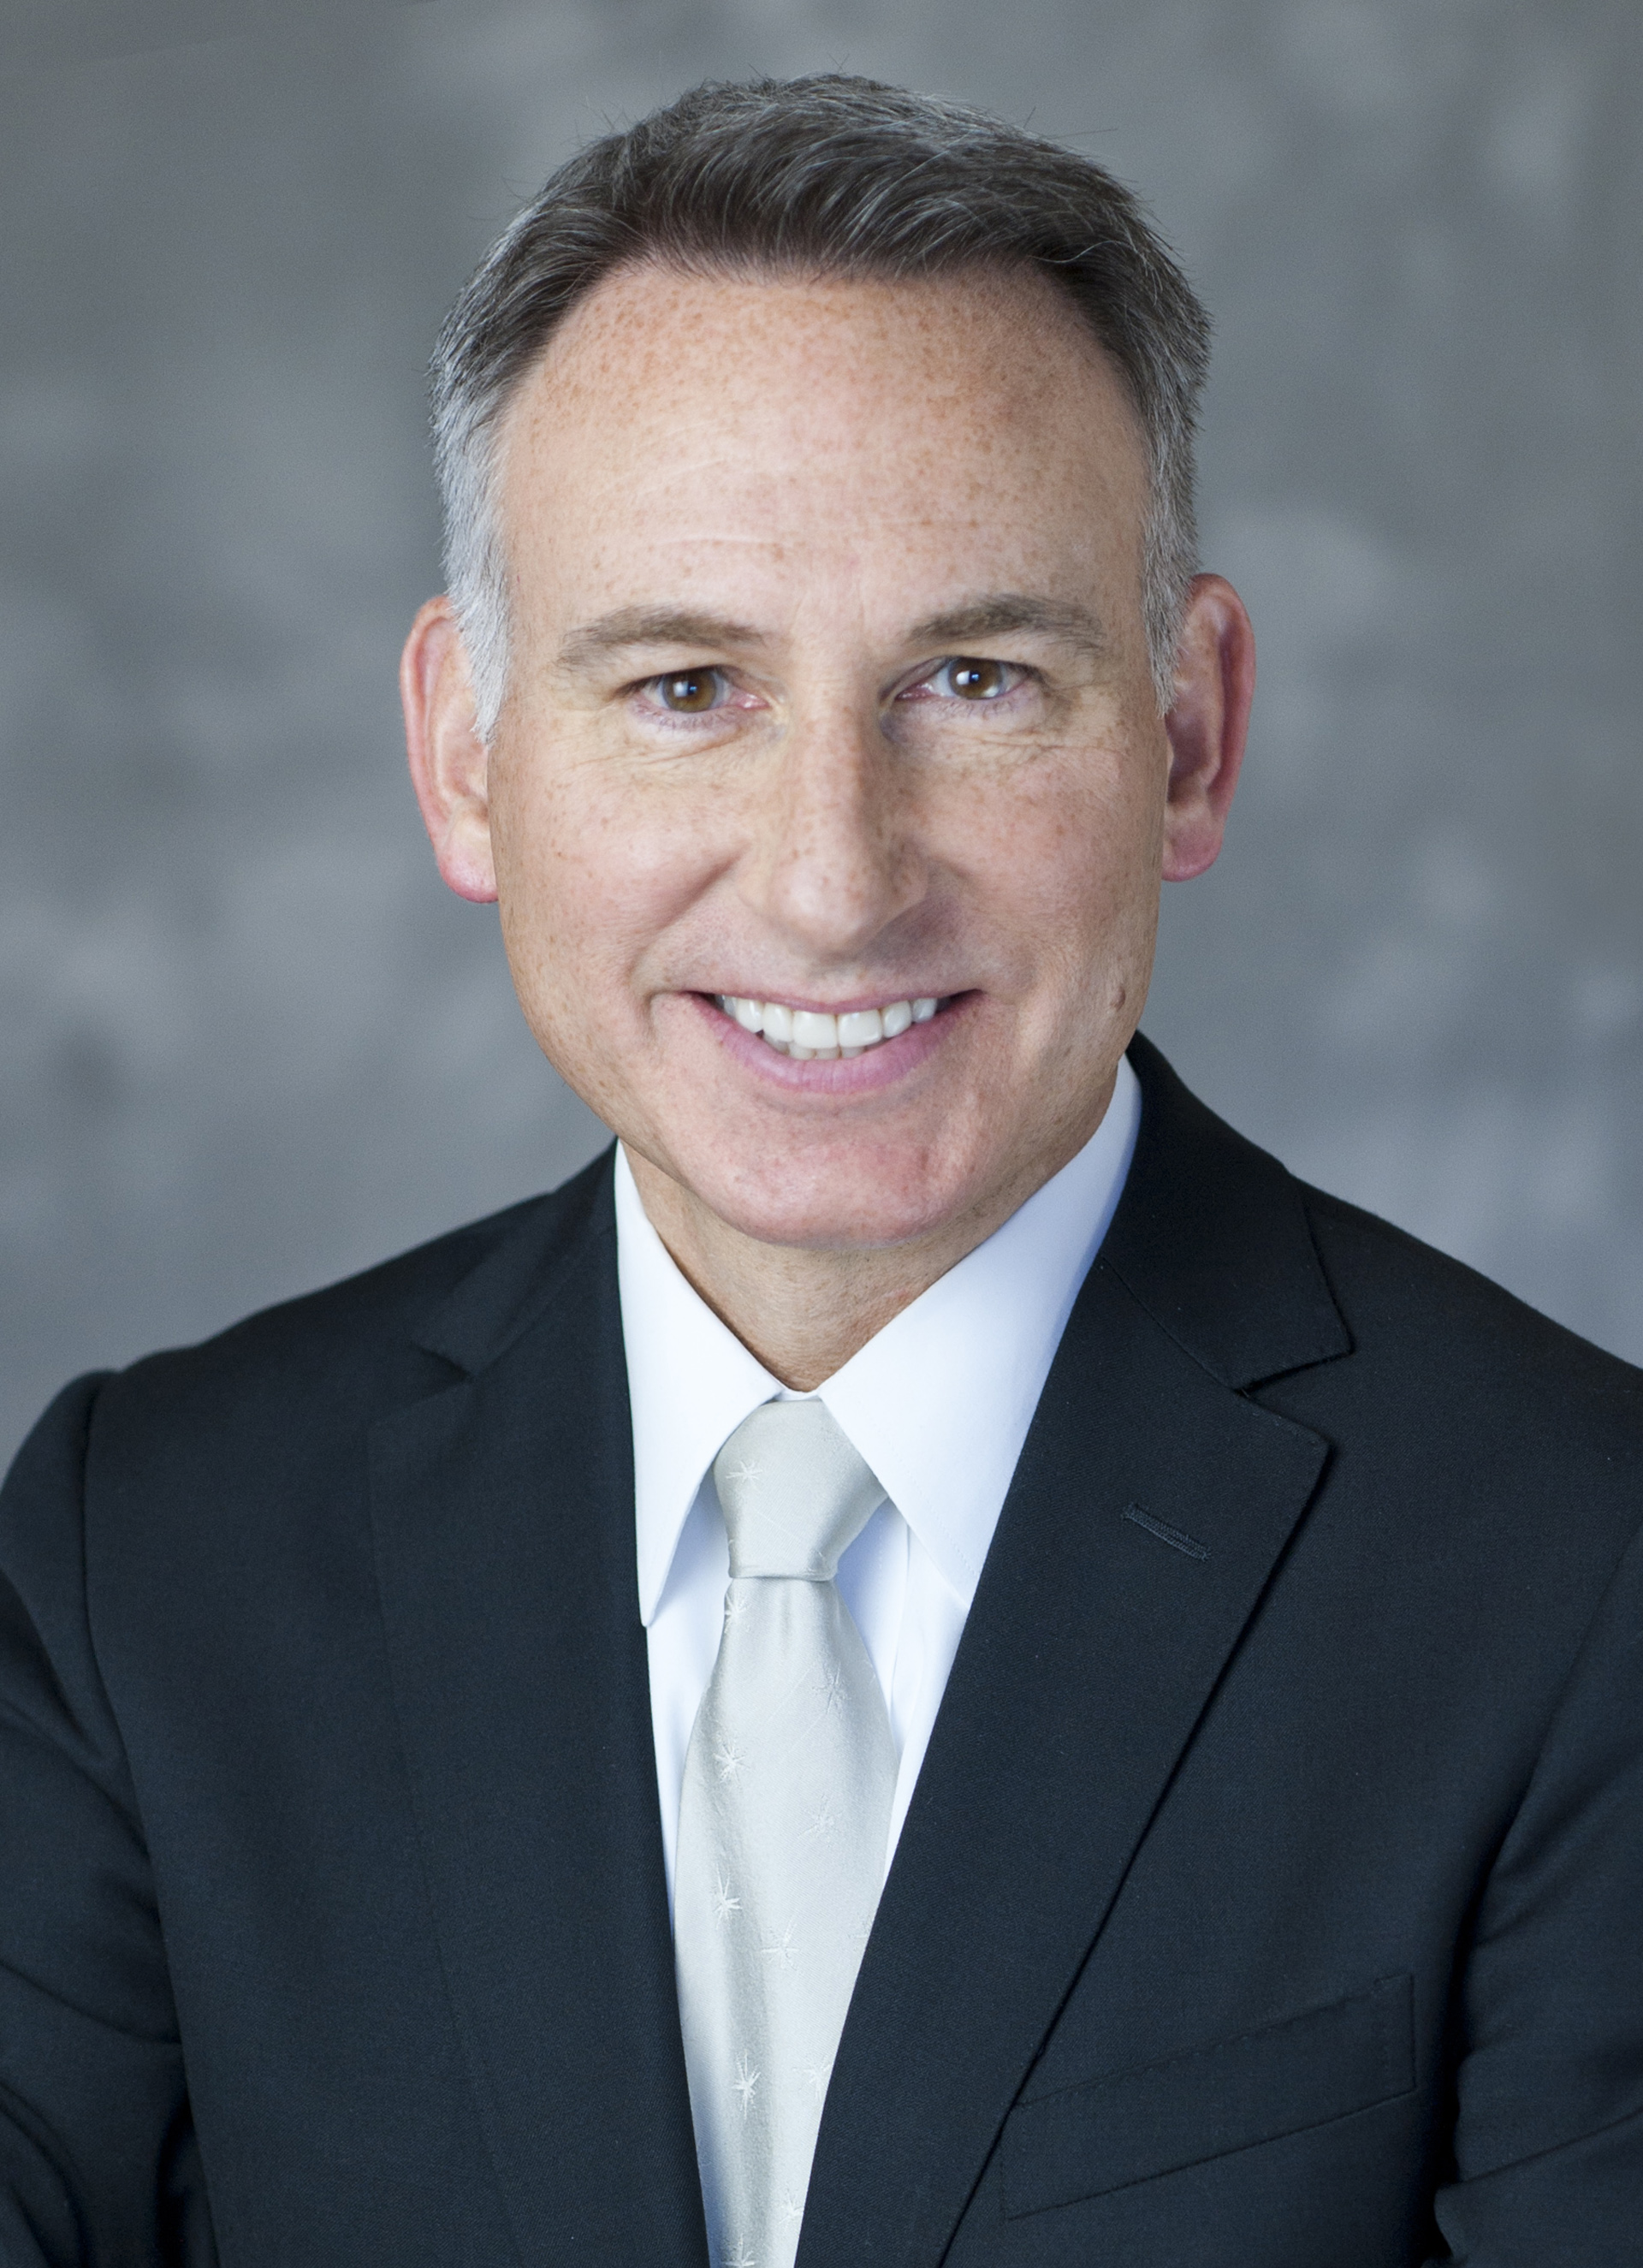 A portrait of King County Executive Dow Constantine